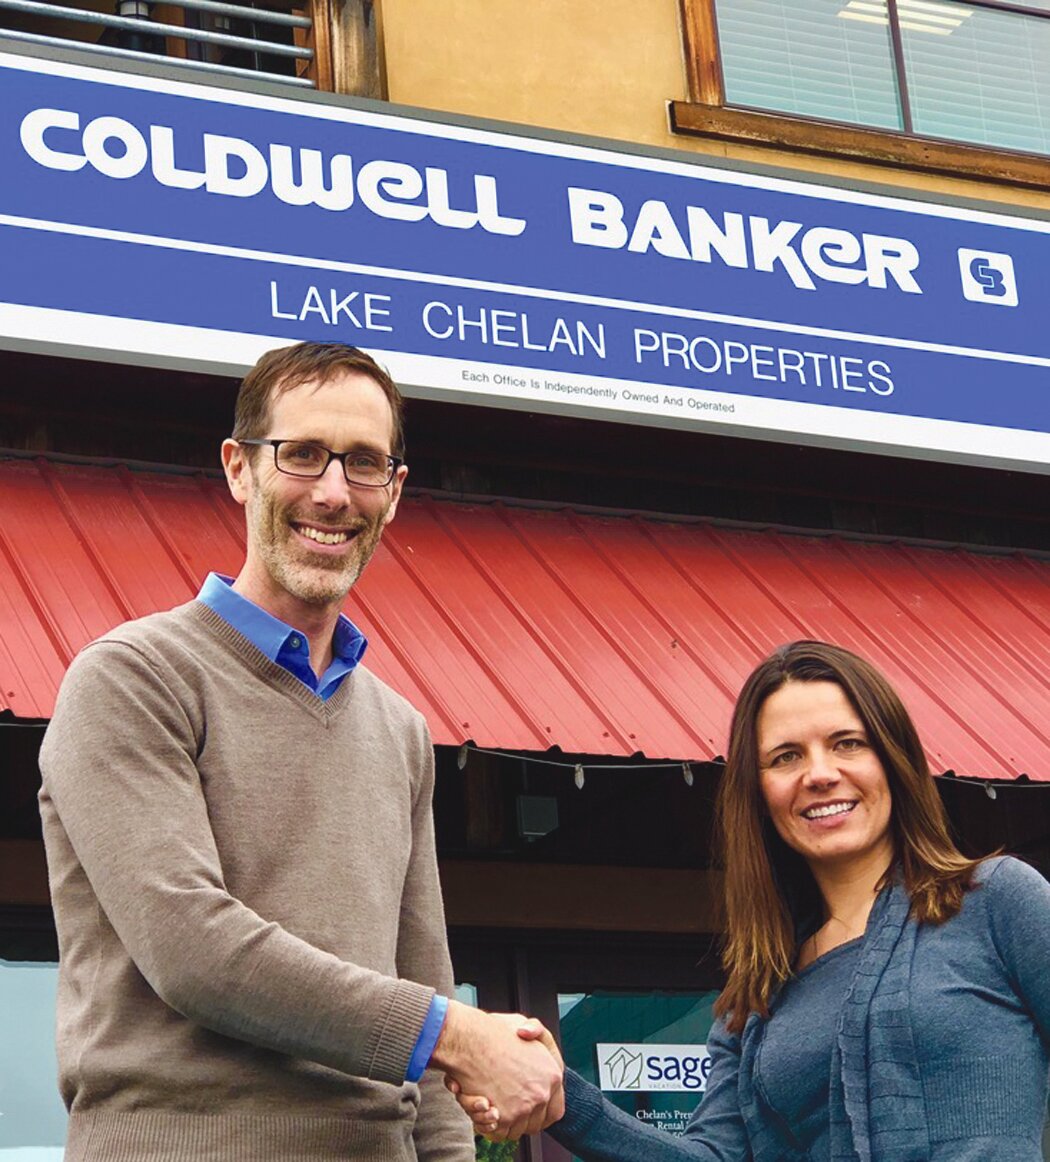 Jessie Simmons (right) has joined Coldwell Banker Lake Chelan Properties and the Guy Evans Real Estate Team as a new Realtor.